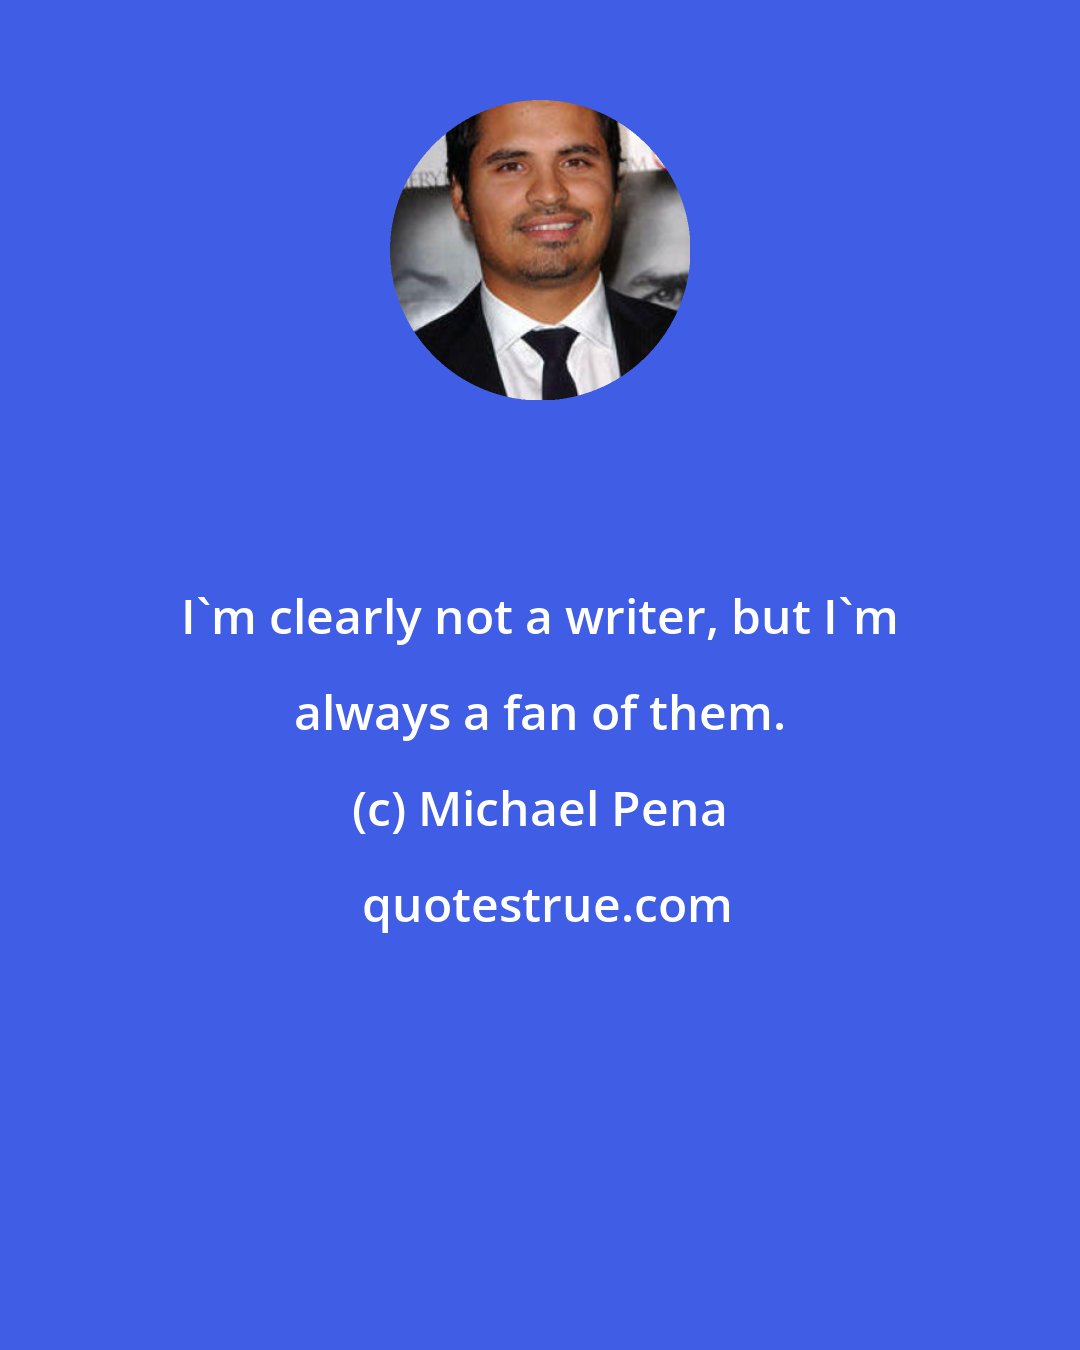 Michael Pena: I'm clearly not a writer, but I'm always a fan of them.